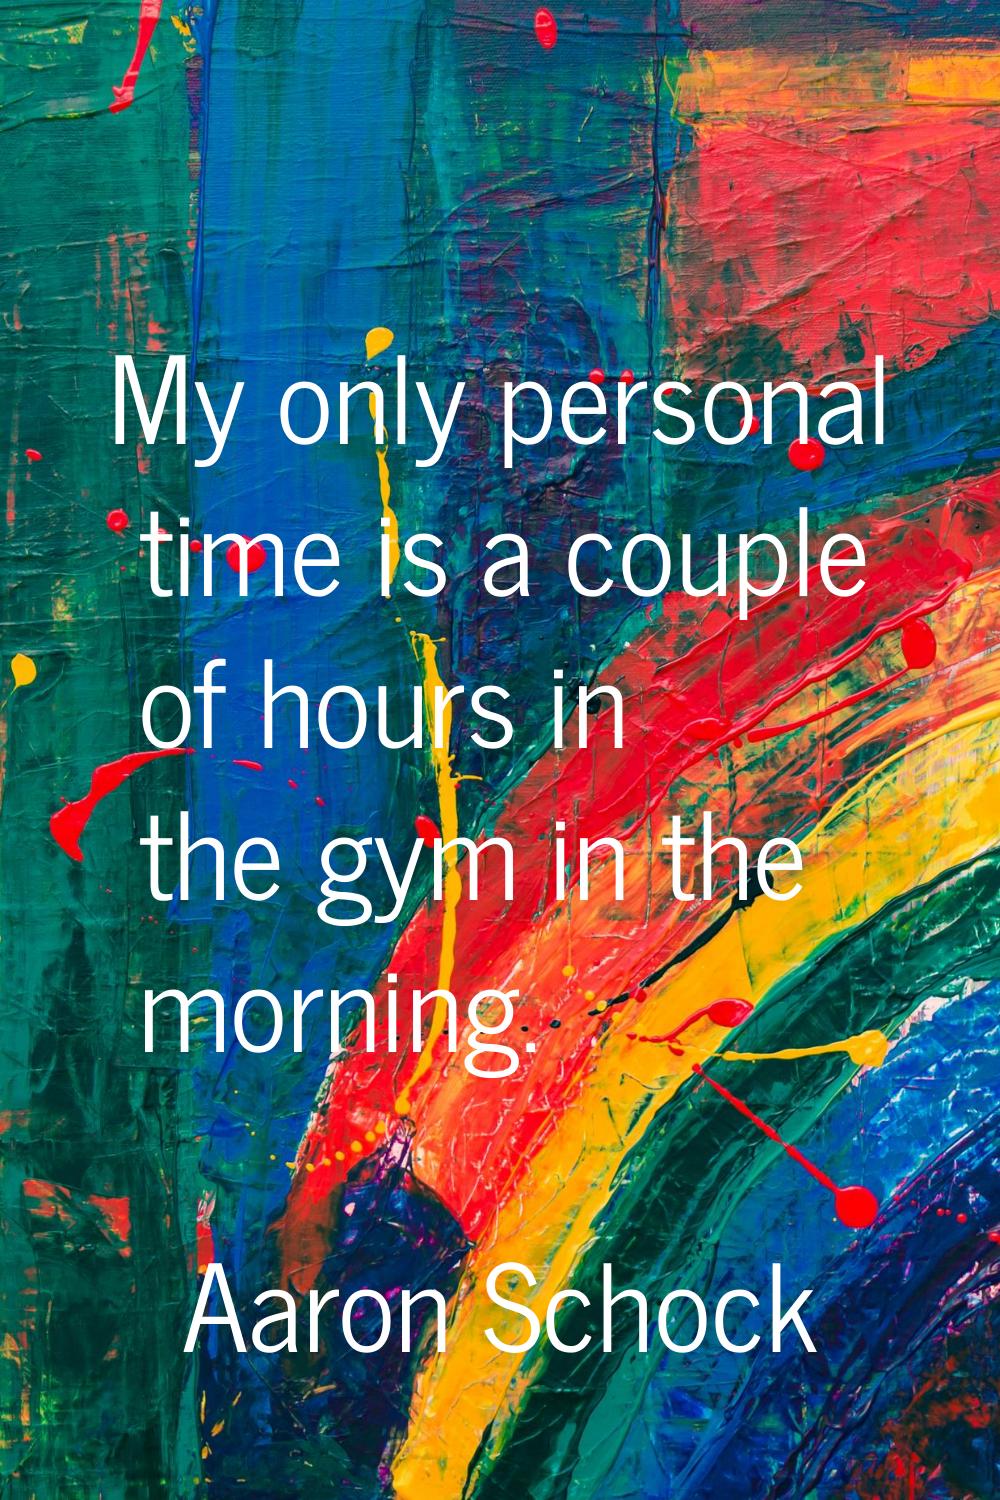 My only personal time is a couple of hours in the gym in the morning.